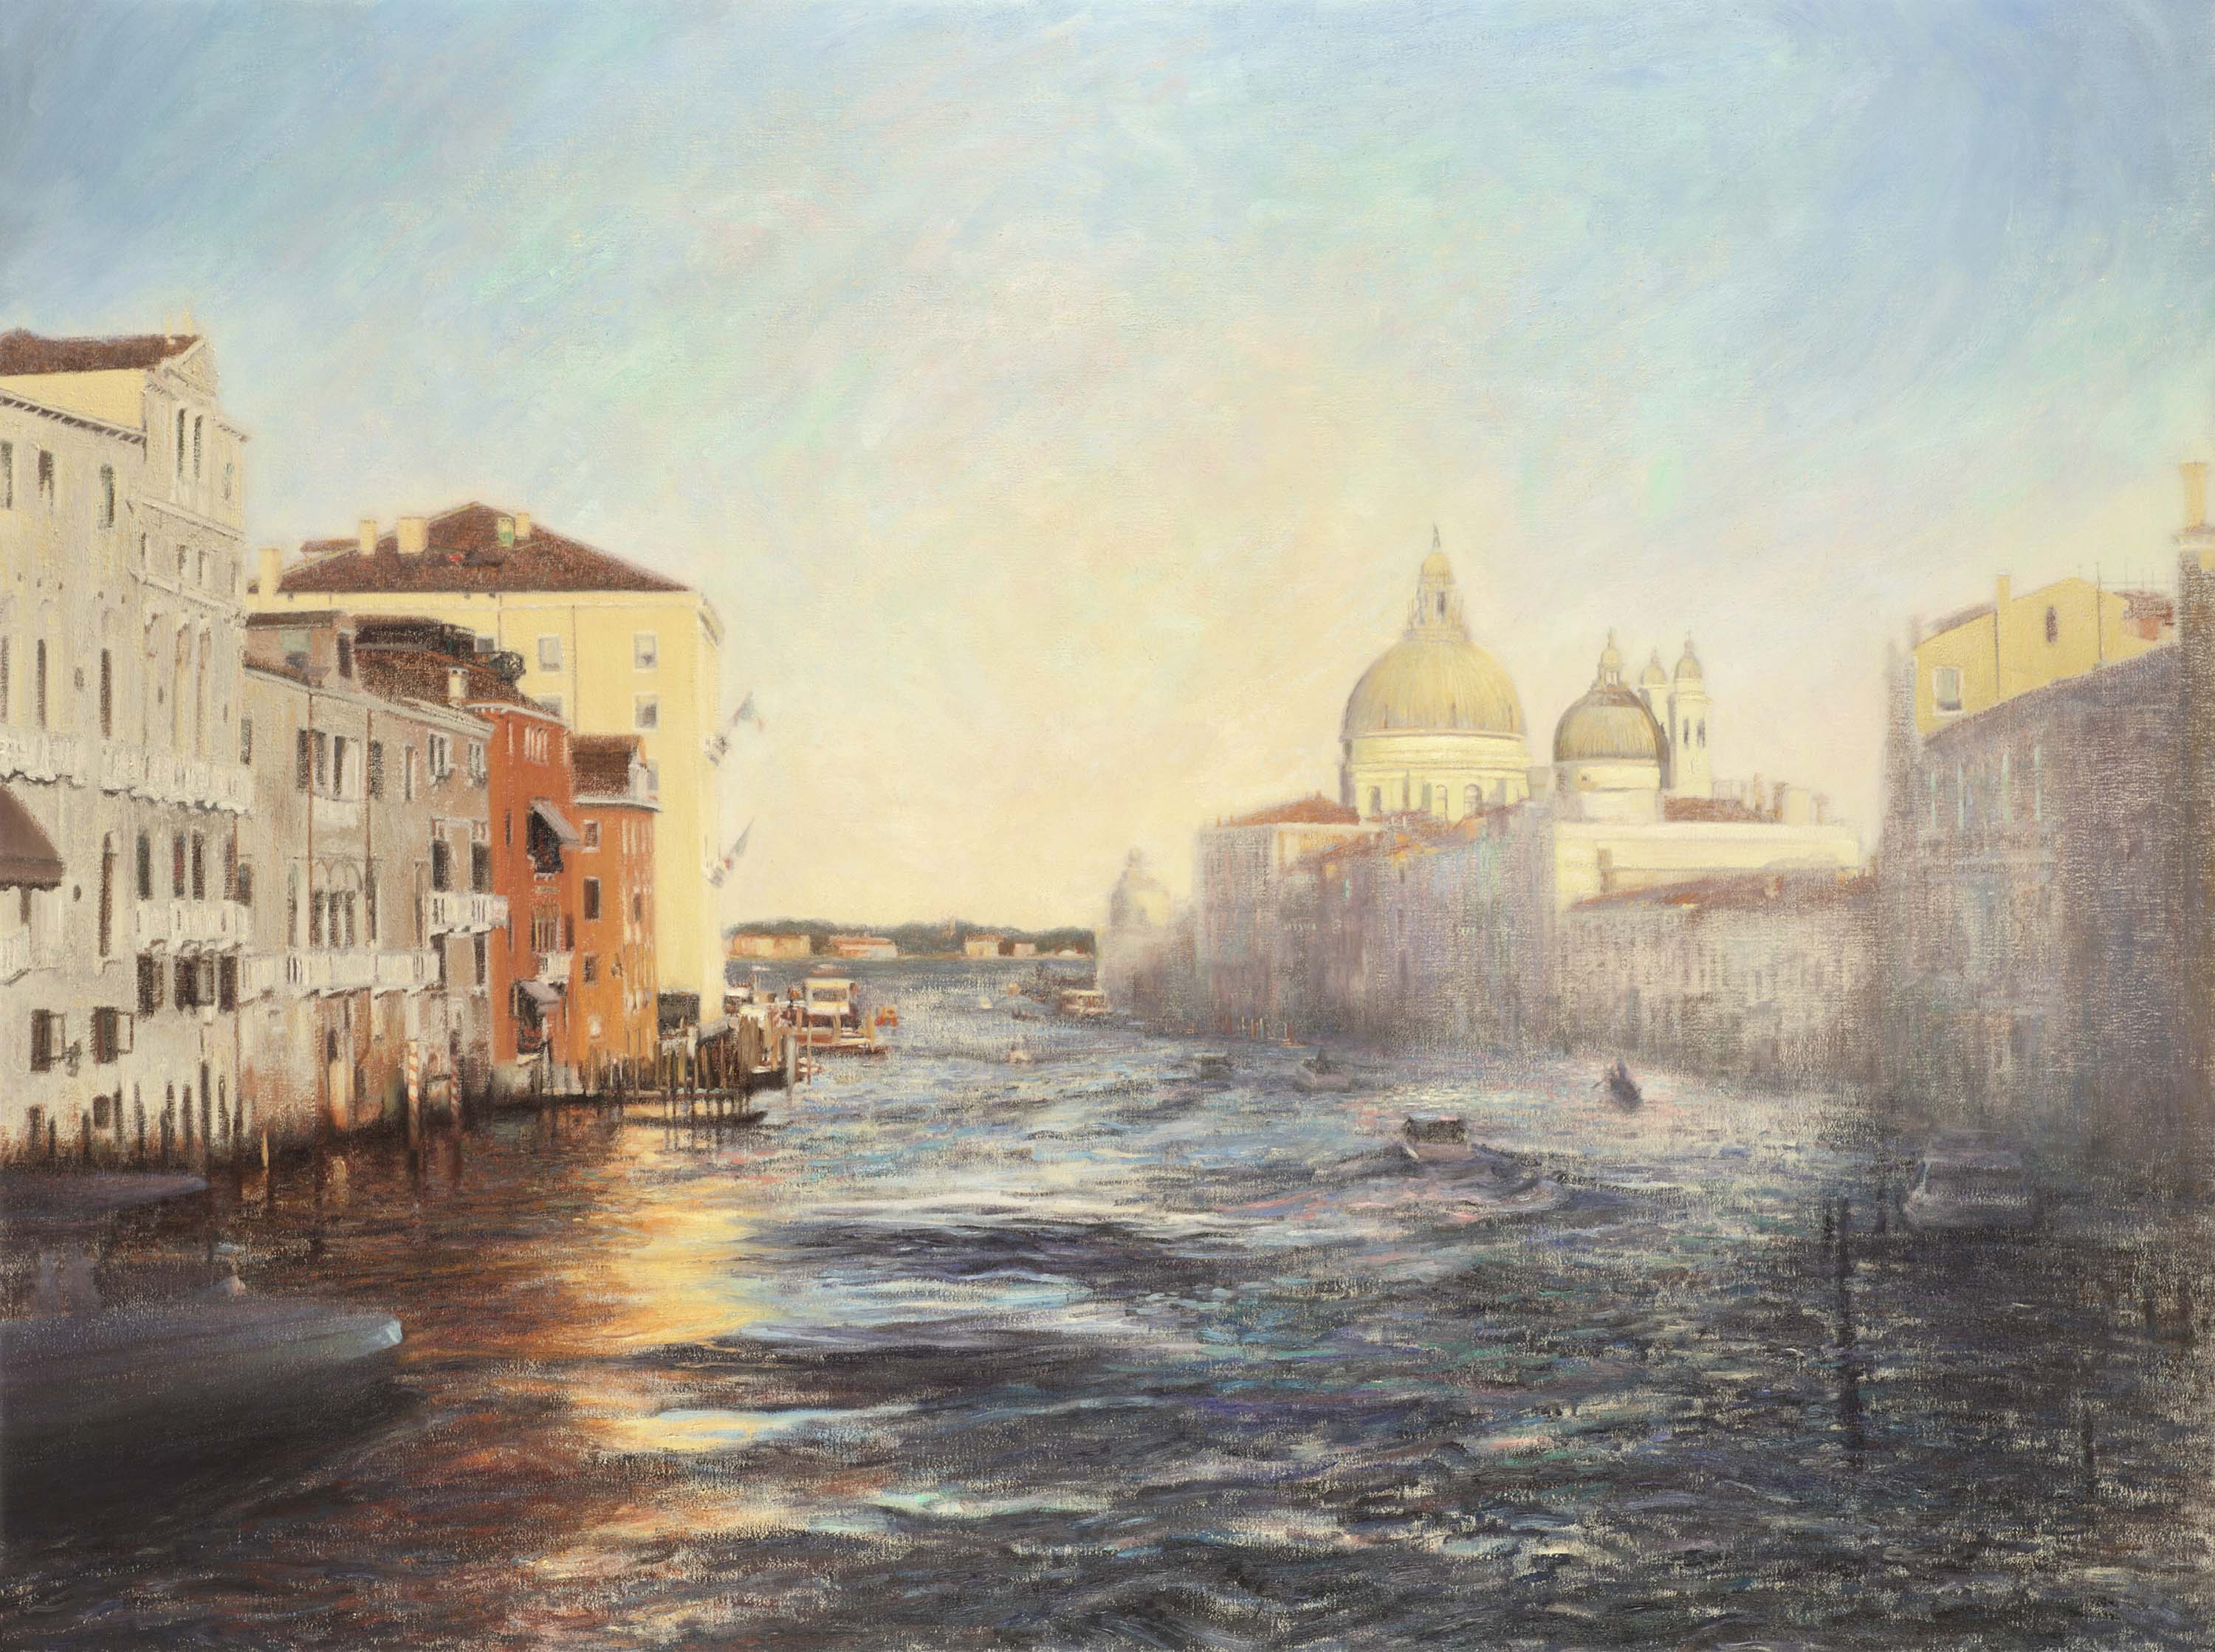 Contemporary art. Title: Grand Canal, Oil on Canvas, 54x72 in by Canadian artist Paul Chizik.